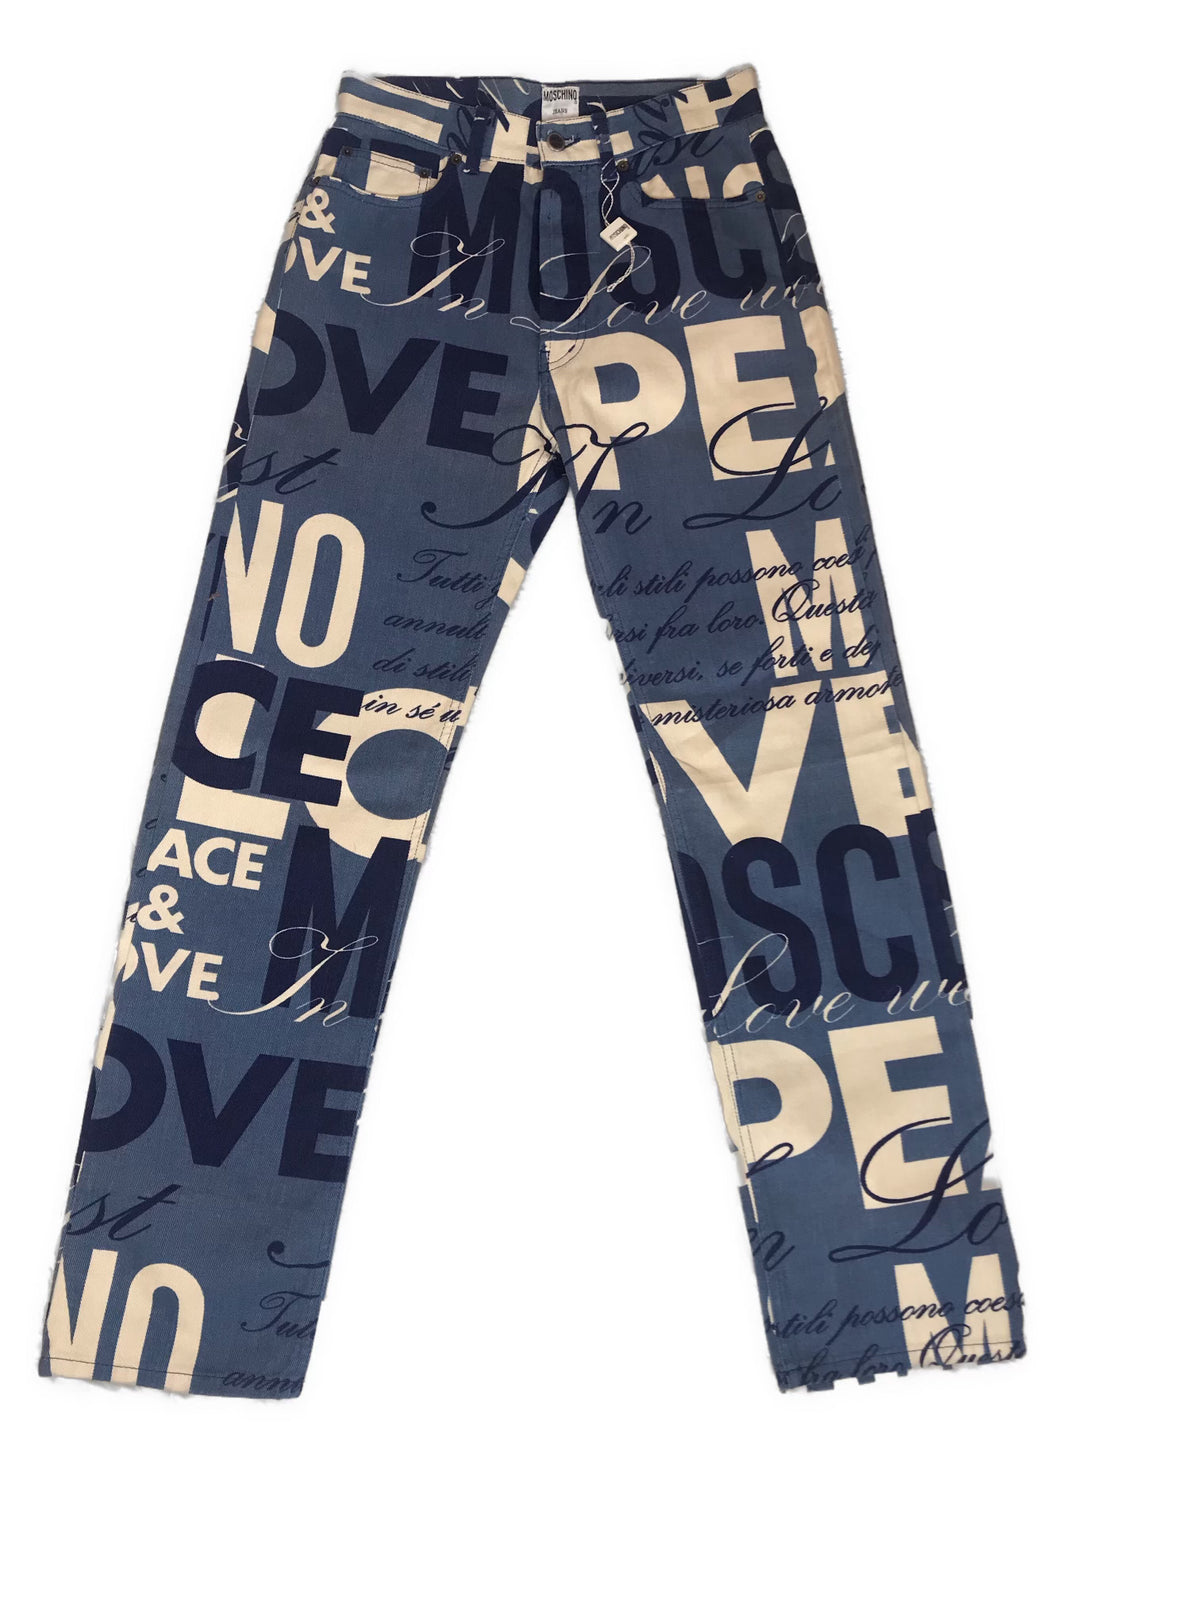 90s Moschino Spellout Print Jeans - ONFEMME By Lindsey's Kloset